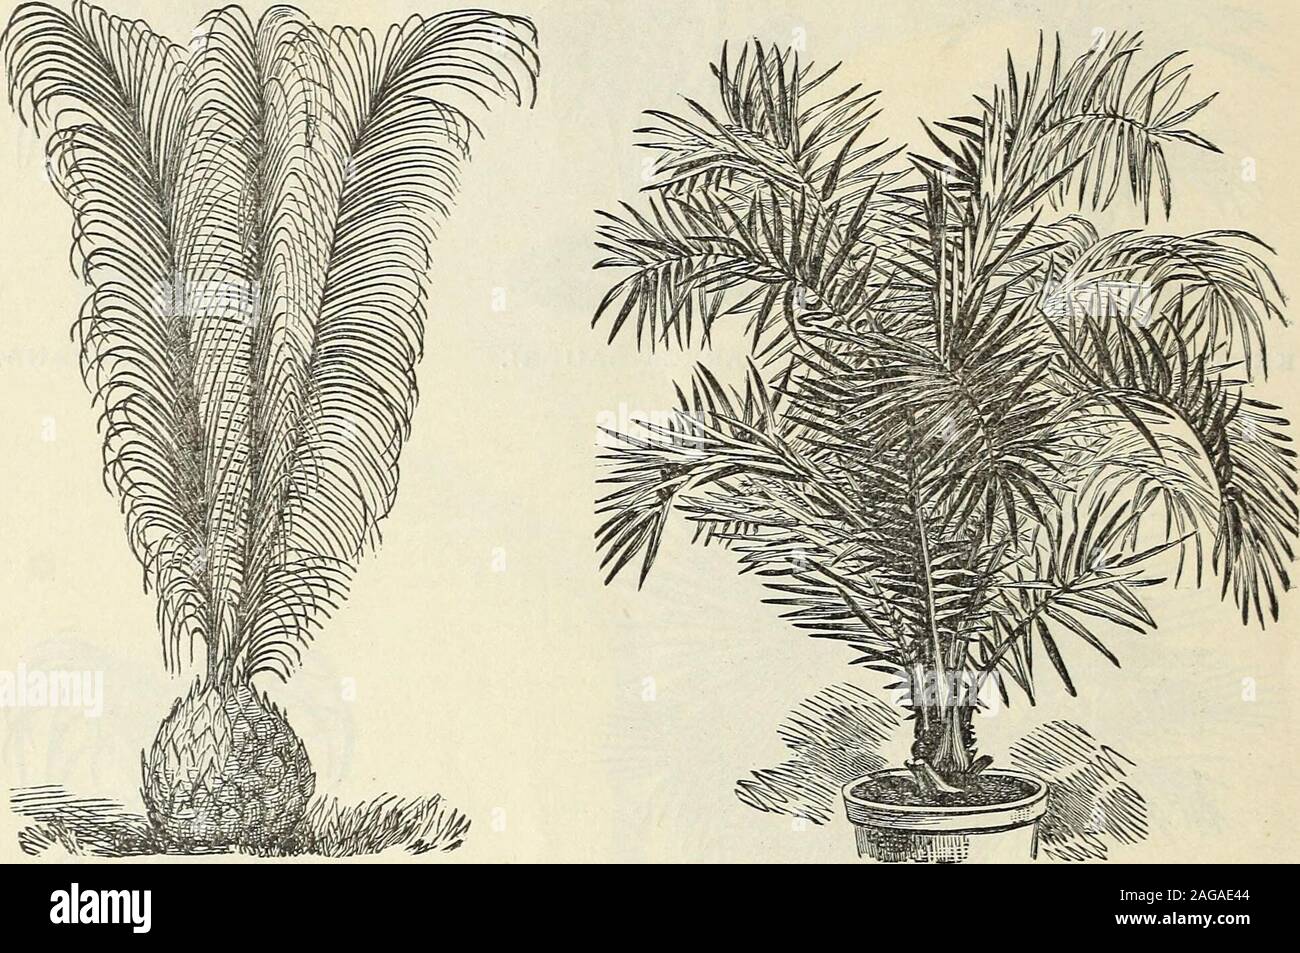 . John Saul's catalogue of plants for the spring of 1889. WASHINGTONIA ROBUSTA. ARECA LUTESCENS. 56 JOHN SAULS DESCRIPTITE CATALOGUE Each.*Seaforthia Elegans, this is a most gracefulPalm emineutiy adapted for the decoration ofthe greenhouse and garden. It also makes afine window plant; leaves are very long andgracefLilly arched, dark green, the whole plantperfectly smooth, a grand decorative plant.(See last page of cover) 30 cts. $1.50 to 2 50 Each.*Trinax Argentea, a very beautiful dwarf Palm, leaves fan-shaped, very handsome..30 c., 50 c. to 1 00*Elegans, a dwarf Palm, leaves fan-shaped ; it Stock Photo